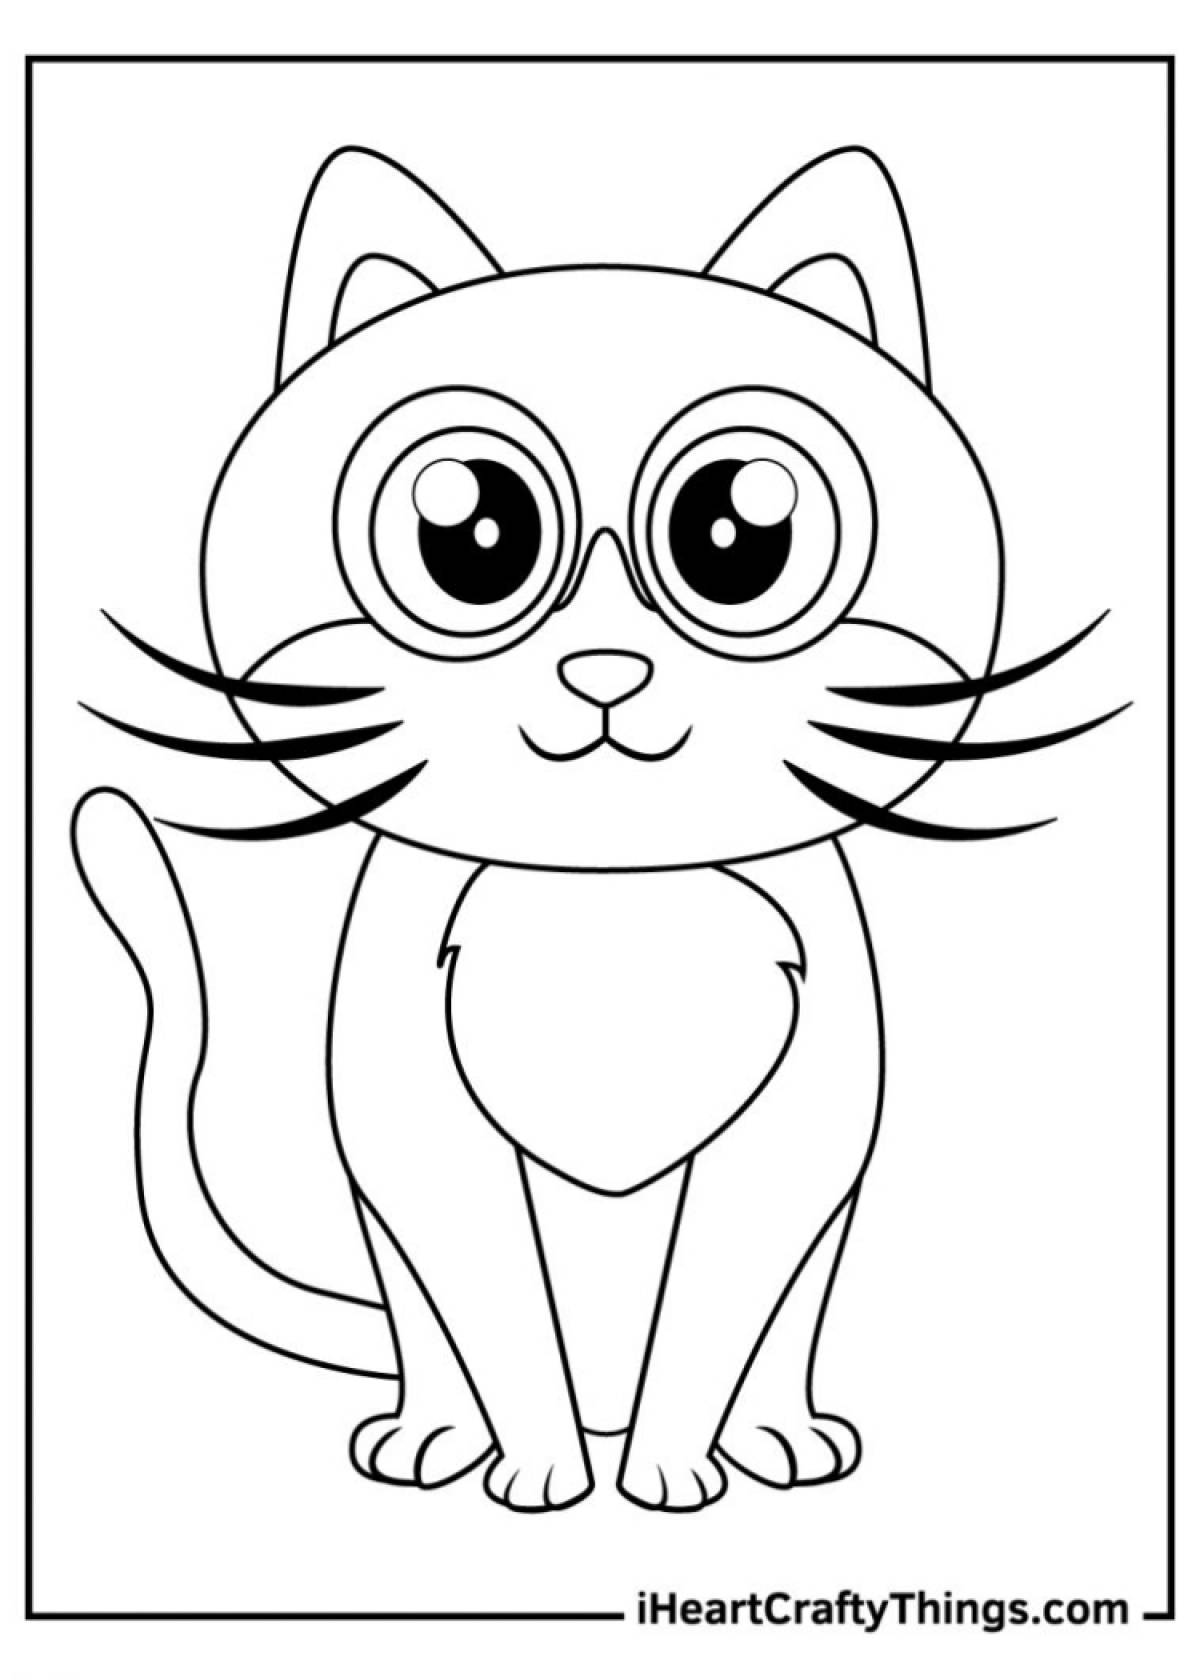 Witty cat coloring book for kids 5-6 years old